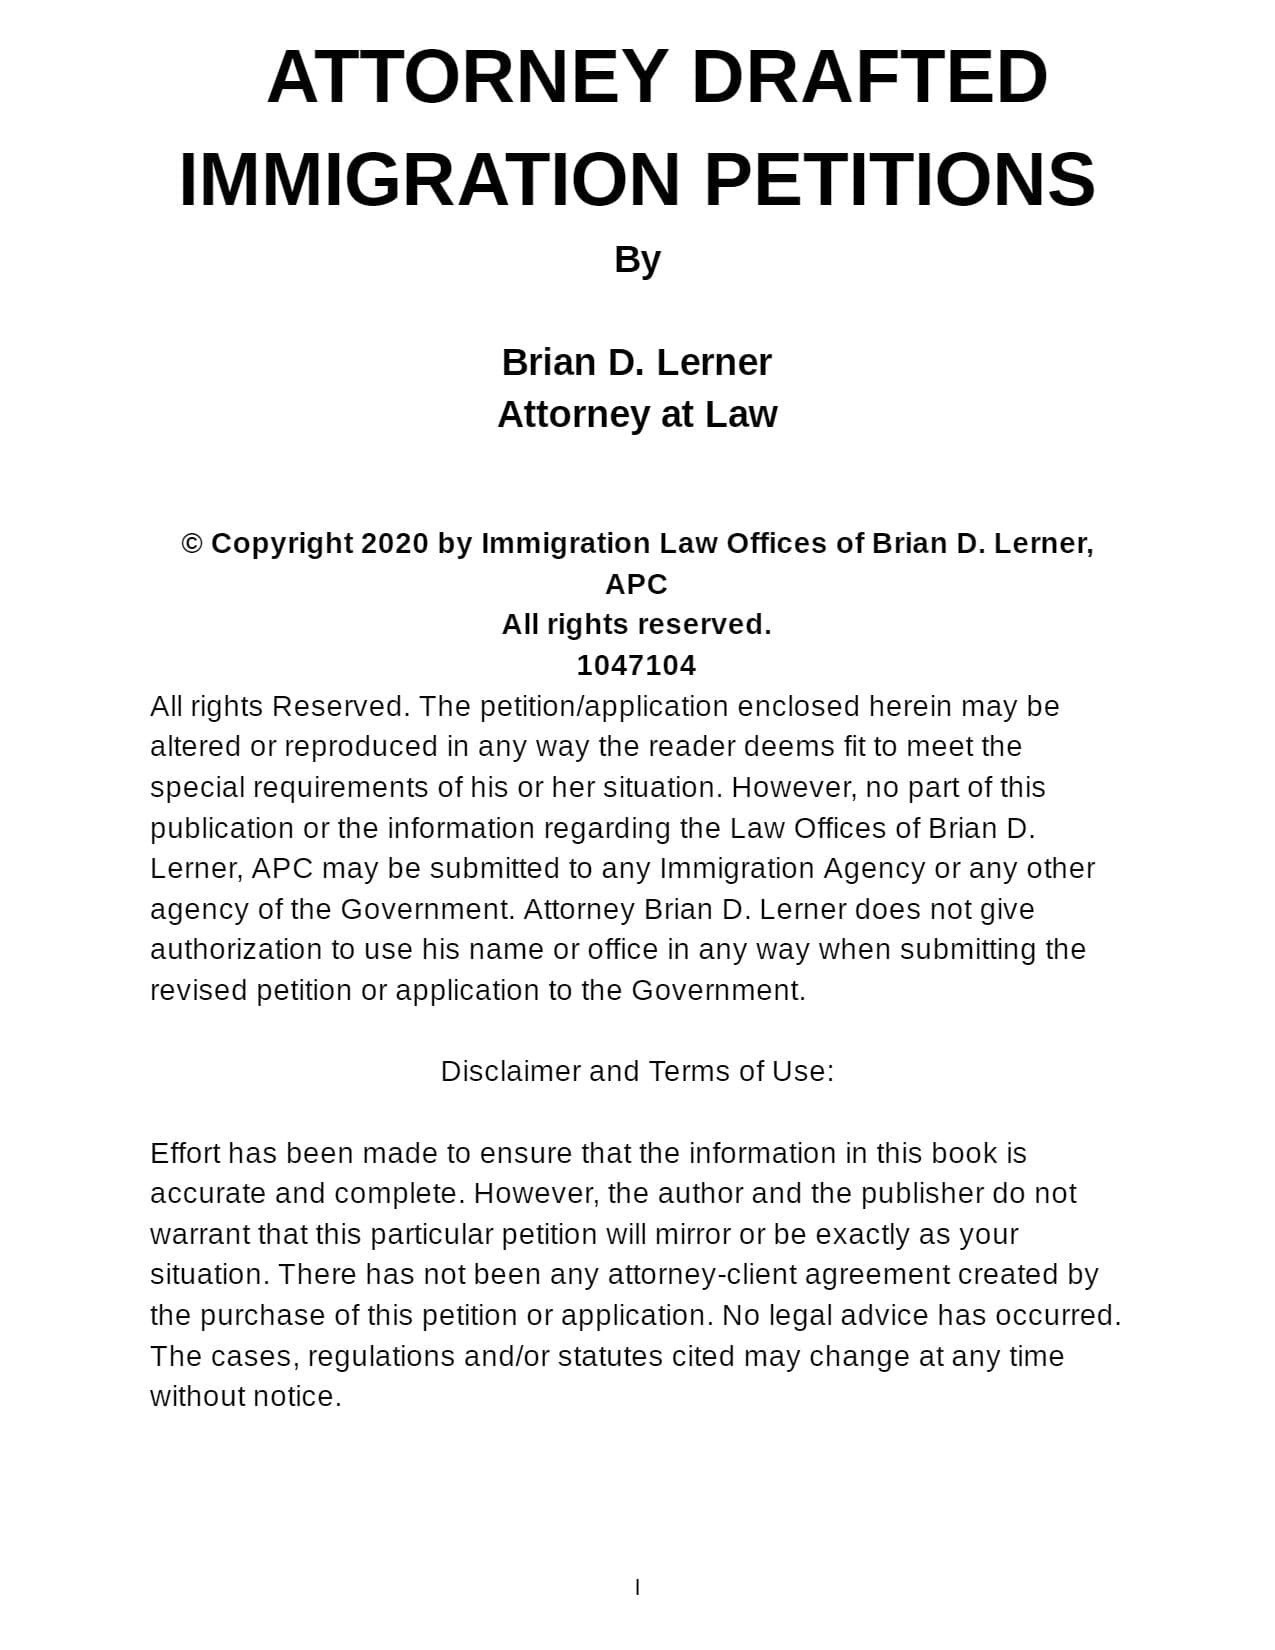 Rocket Immigration Petitions Immigration Visa EB-1(c) Multinational Manager Petition